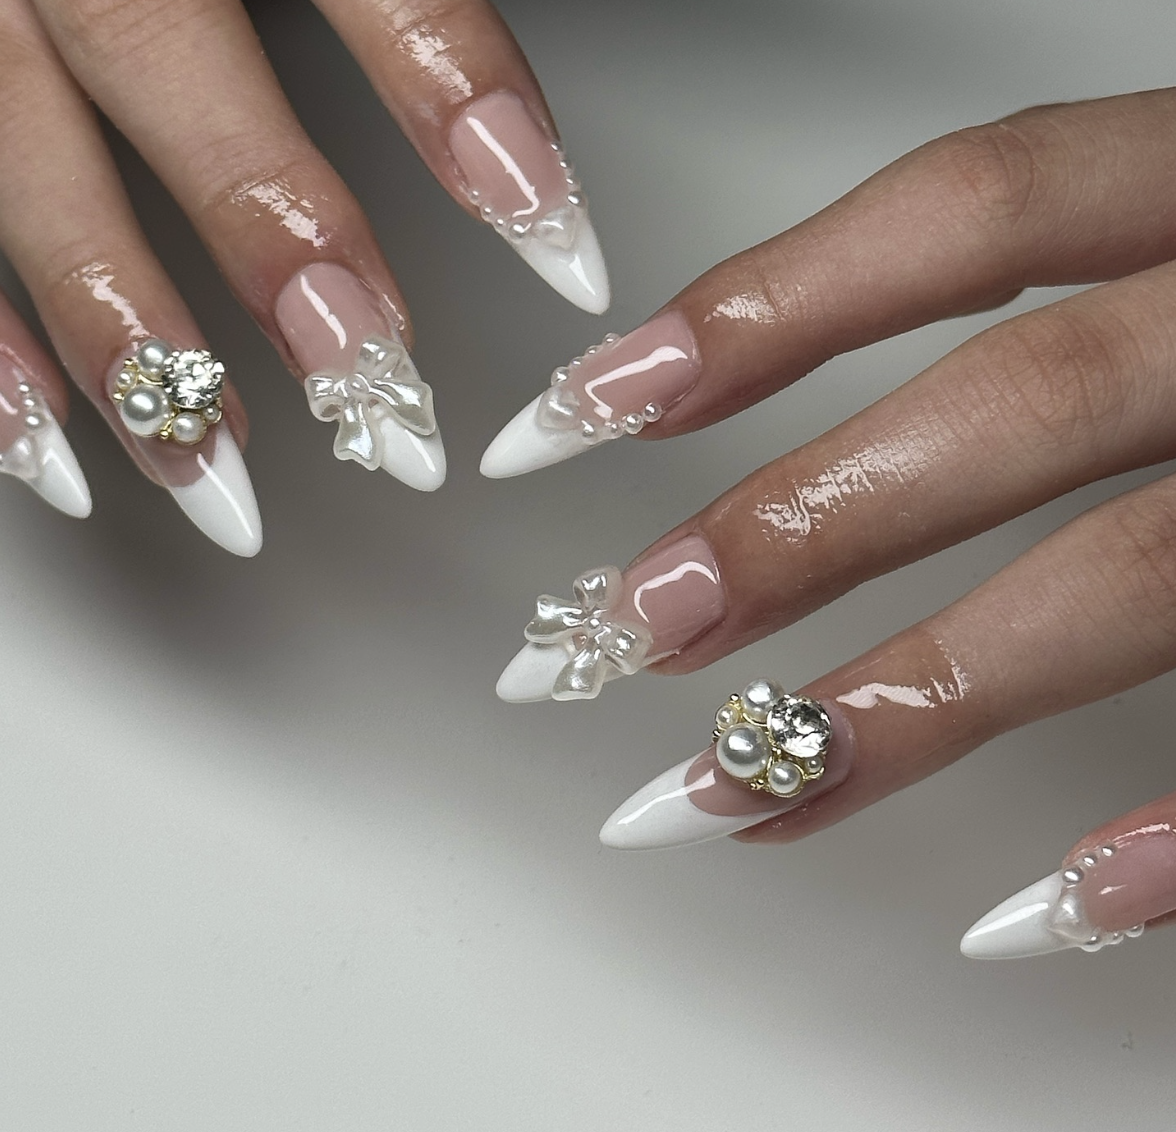 25 Coquette Nails You’re Going to Obsess Over